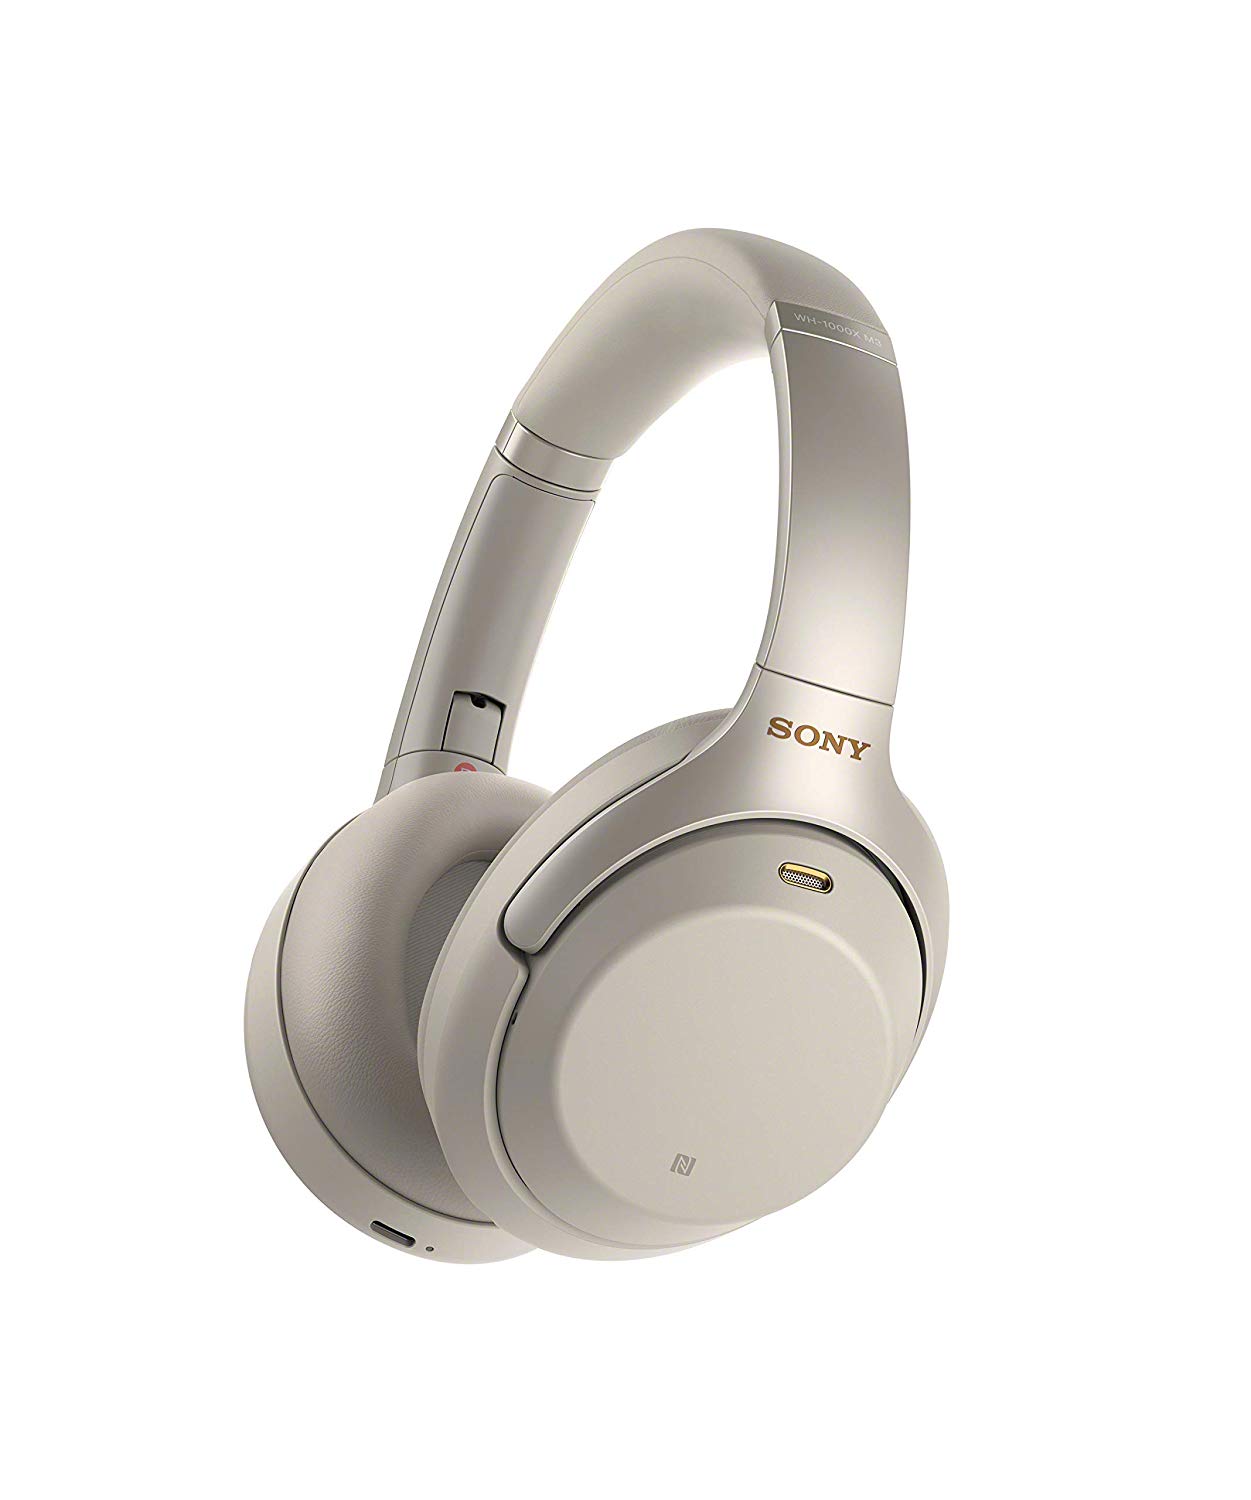 Sony Noise Cancelling Headphones WH1000XM3: Wireless Bluetooth Over the Ear Headphones with Mic and Alexa voice control - Industry Leading Active Nois